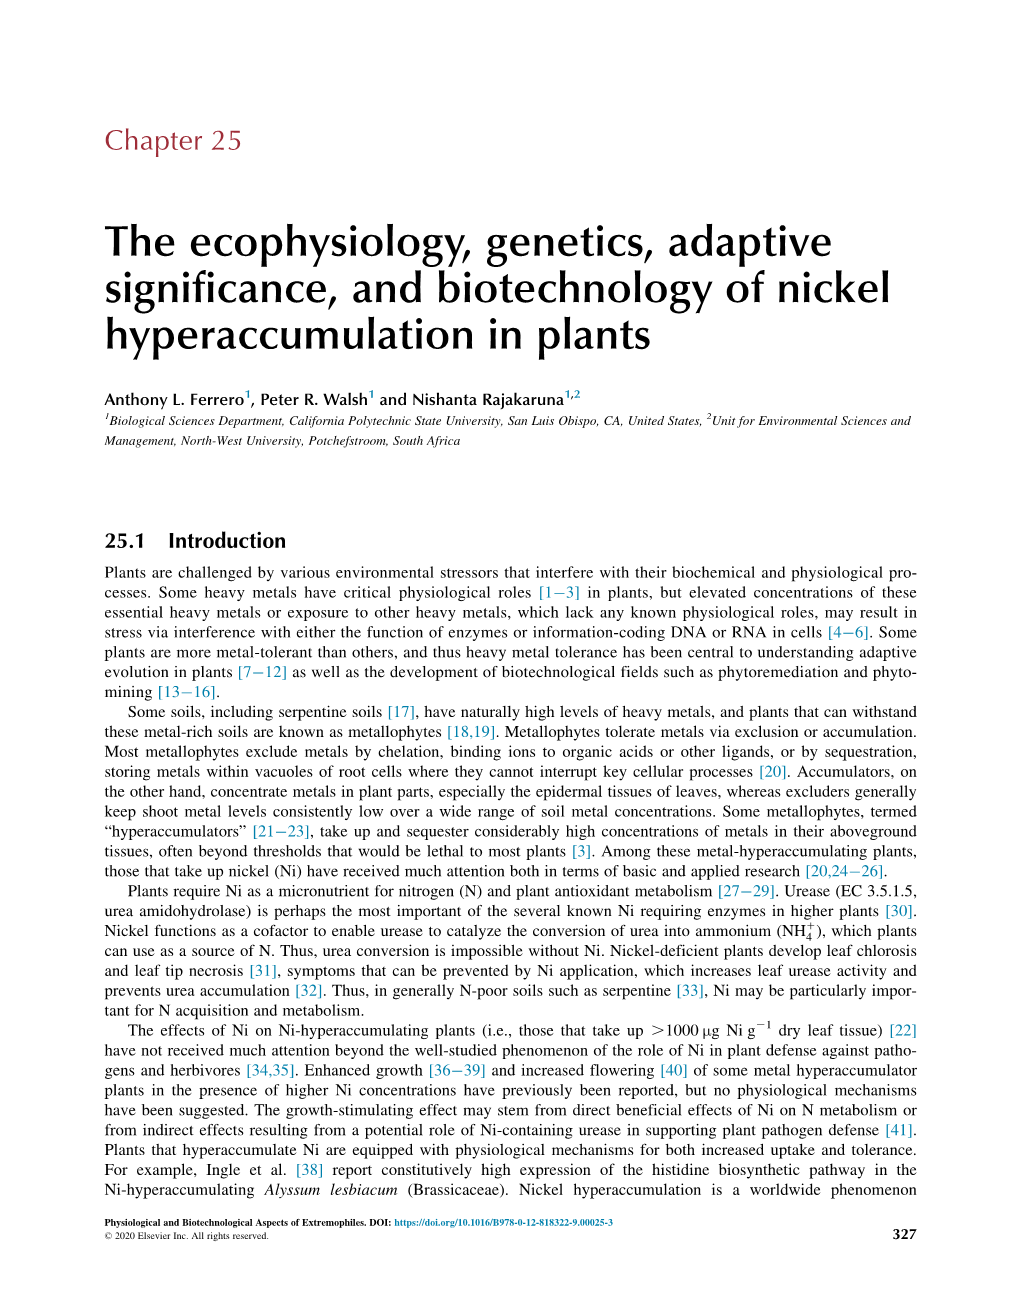 Chapter 25. the Ecophysiology, Genetics, Adaptive Significance, And